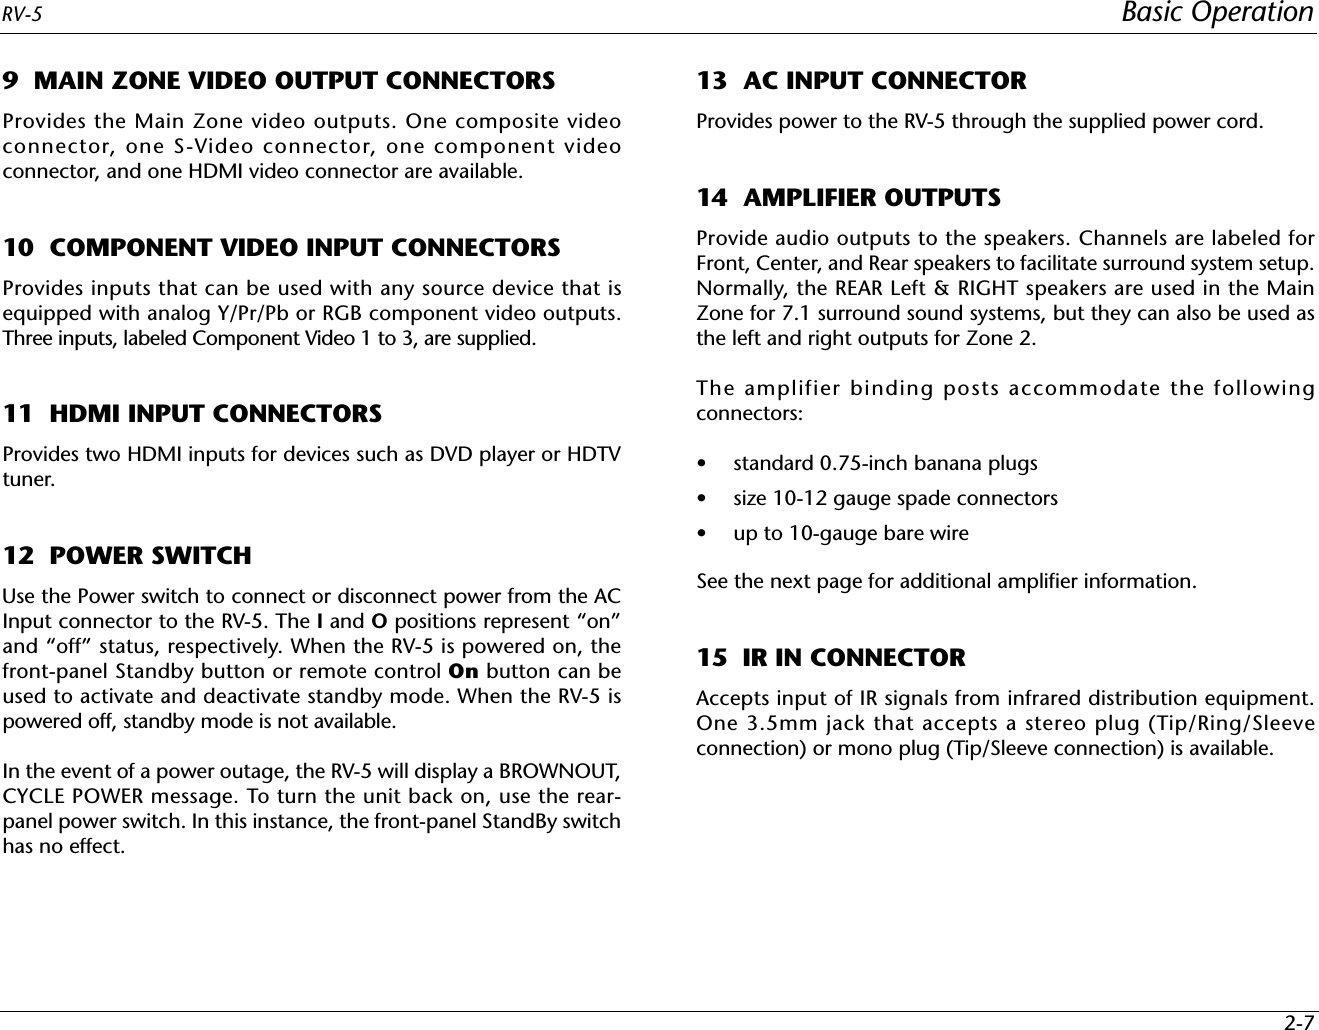 RV-5 Basic Operation2-79  MAIN ZONE VIDEO OUTPUT CONNECTORSProvides the Main Zone video outputs. One composite videoconnector, one S-Video connector, one component videoconnector, and one HDMI video connector are available.10  COMPONENT VIDEO INPUT CONNECTORSProvides inputs that can be used with any source device that isequipped with analog Y/Pr/Pb or RGB component video outputs.Three inputs, labeled Component Video 1 to 3, are supplied.11  HDMI INPUT CONNECTORSProvides two HDMI inputs for devices such as DVD player or HDTVtuner.12  POWER SWITCHUse the Power switch to connect or disconnect power from the ACInput connector to the RV-5. The I and O positions represent “on”and “off” status, respectively. When the RV-5 is powered on, thefront-panel Standby button or remote control On button can beused to activate and deactivate standby mode. When the RV-5 ispowered off, standby mode is not available.In the event of a power outage, the RV-5 will display a BROWNOUT,CYCLE POWER message. To turn the unit back on, use the rear-panel power switch. In this instance, the front-panel StandBy switchhas no effect.13  AC INPUT CONNECTORProvides power to the RV-5 through the supplied power cord.14  AMPLIFIER OUTPUTSProvide audio outputs to the speakers. Channels are labeled forFront, Center, and Rear speakers to facilitate surround system setup.Normally, the REAR Left &amp; RIGHT speakers are used in the MainZone for 7.1 surround sound systems, but they can also be used asthe left and right outputs for Zone 2.The amplifier binding posts accommodate the followingconnectors: • standard 0.75-inch banana plugs • size 10-12 gauge spade connectors• up to 10-gauge bare wireSee the next page for additional amplifier information. 15  IR IN CONNECTORAccepts input of IR signals from infrared distribution equipment.One 3.5mm jack that accepts a stereo plug (Tip/Ring/Sleeveconnection) or mono plug (Tip/Sleeve connection) is available.